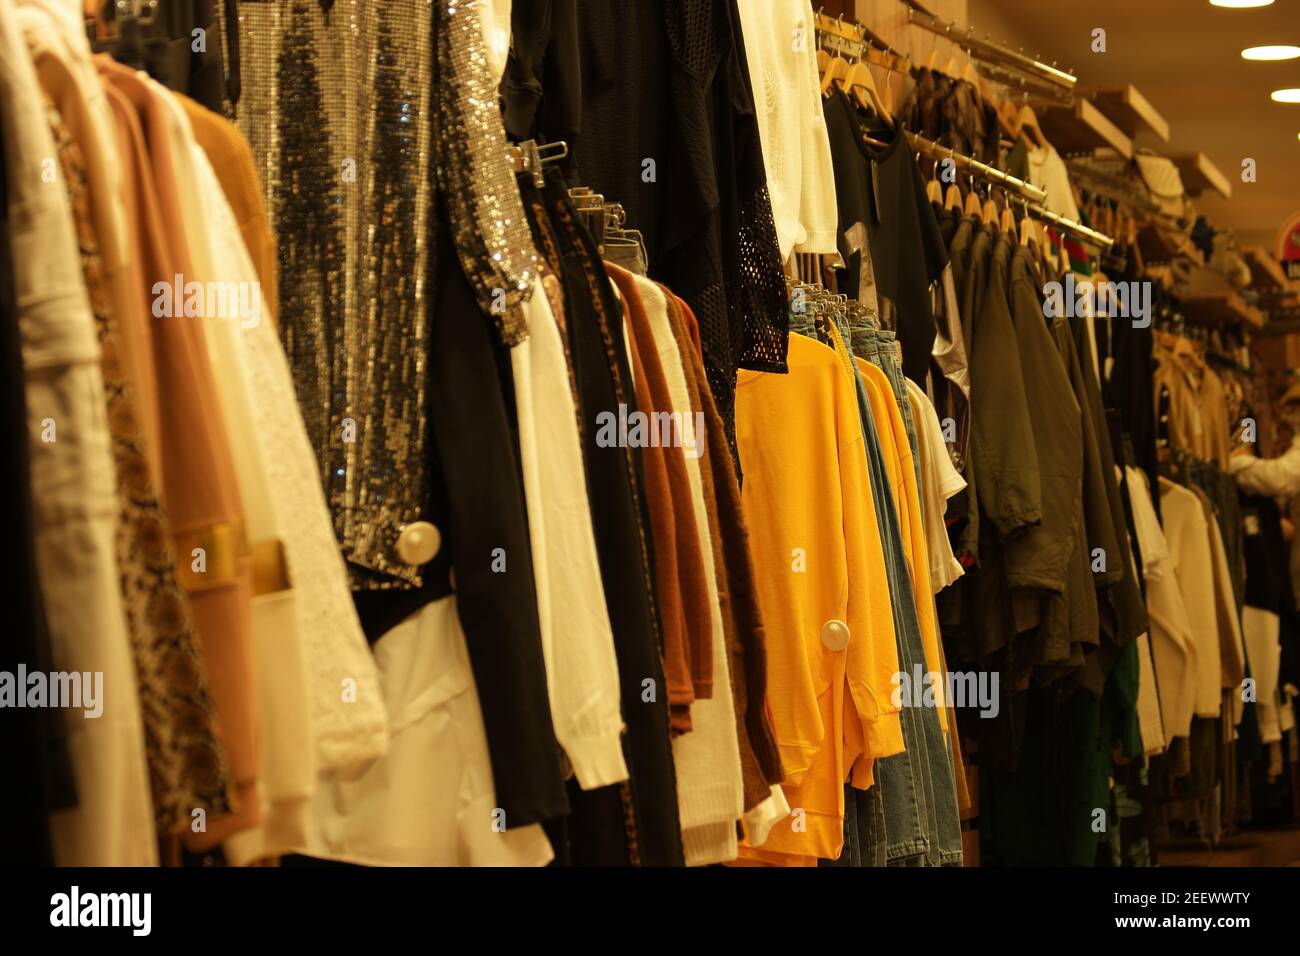 Clothes hanging on rack close up. Stock Photo